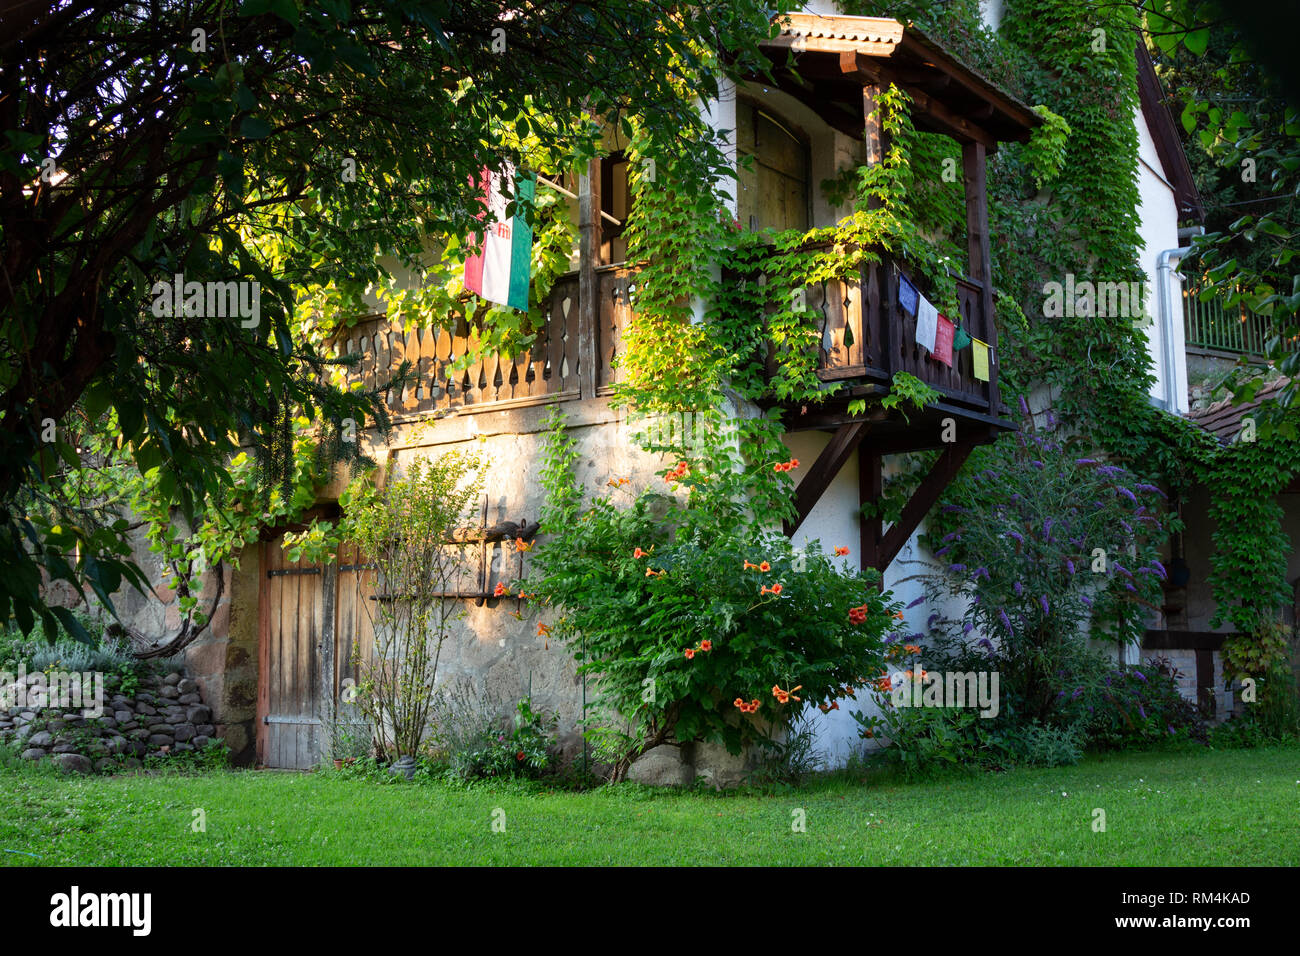 Old house overgrown with flowering creeping plants at Visegrád, Hungary Stock Photo